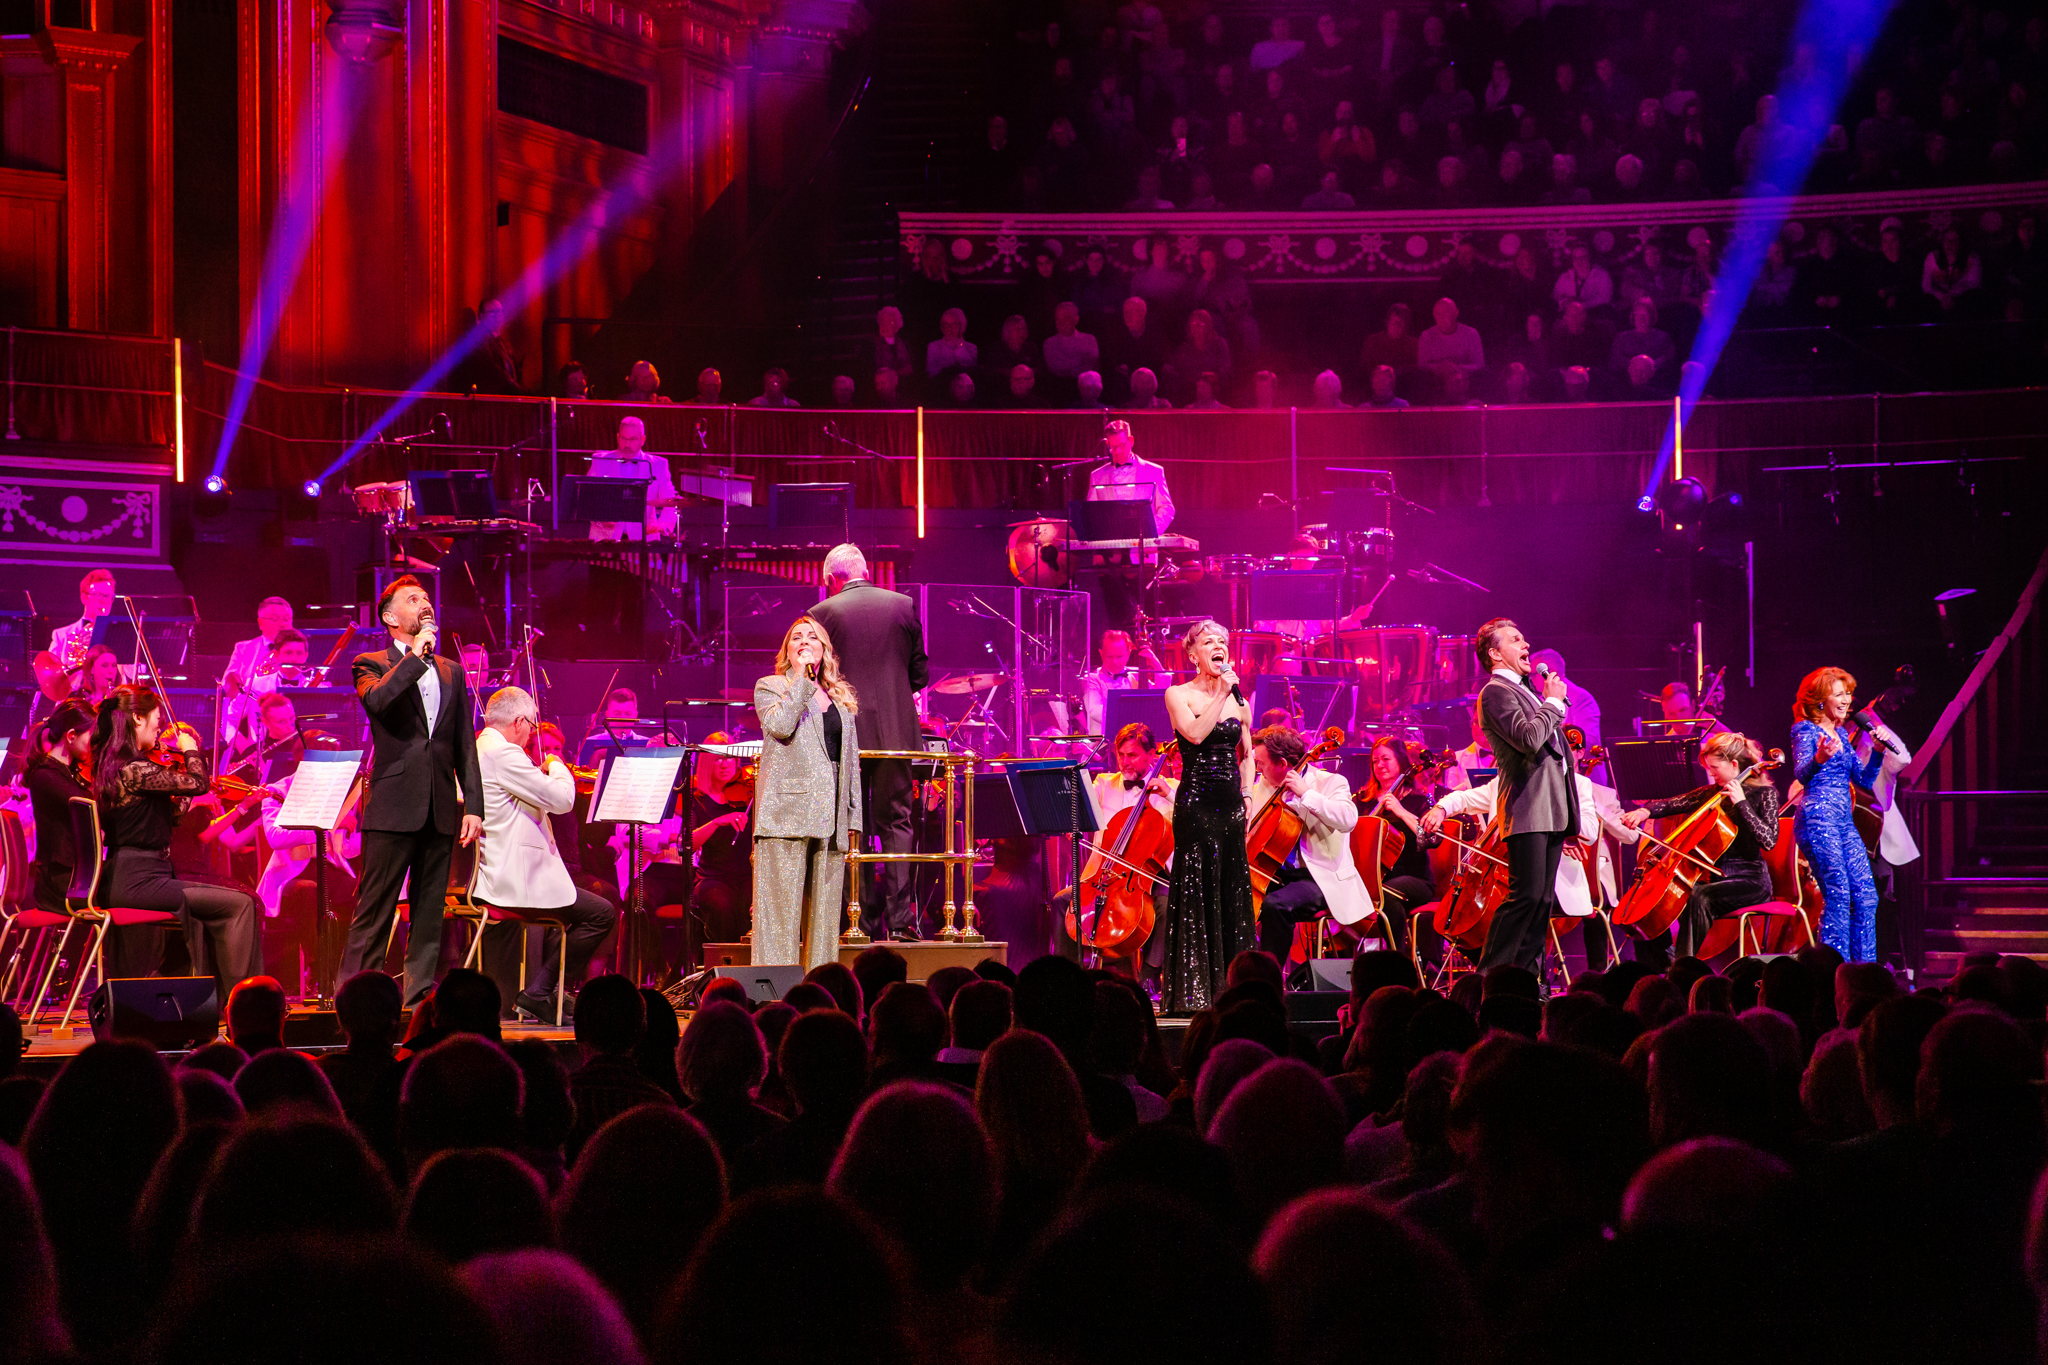 Bonnie Langford and other singers on stage with the Orchestra at the Royal Albert Hall